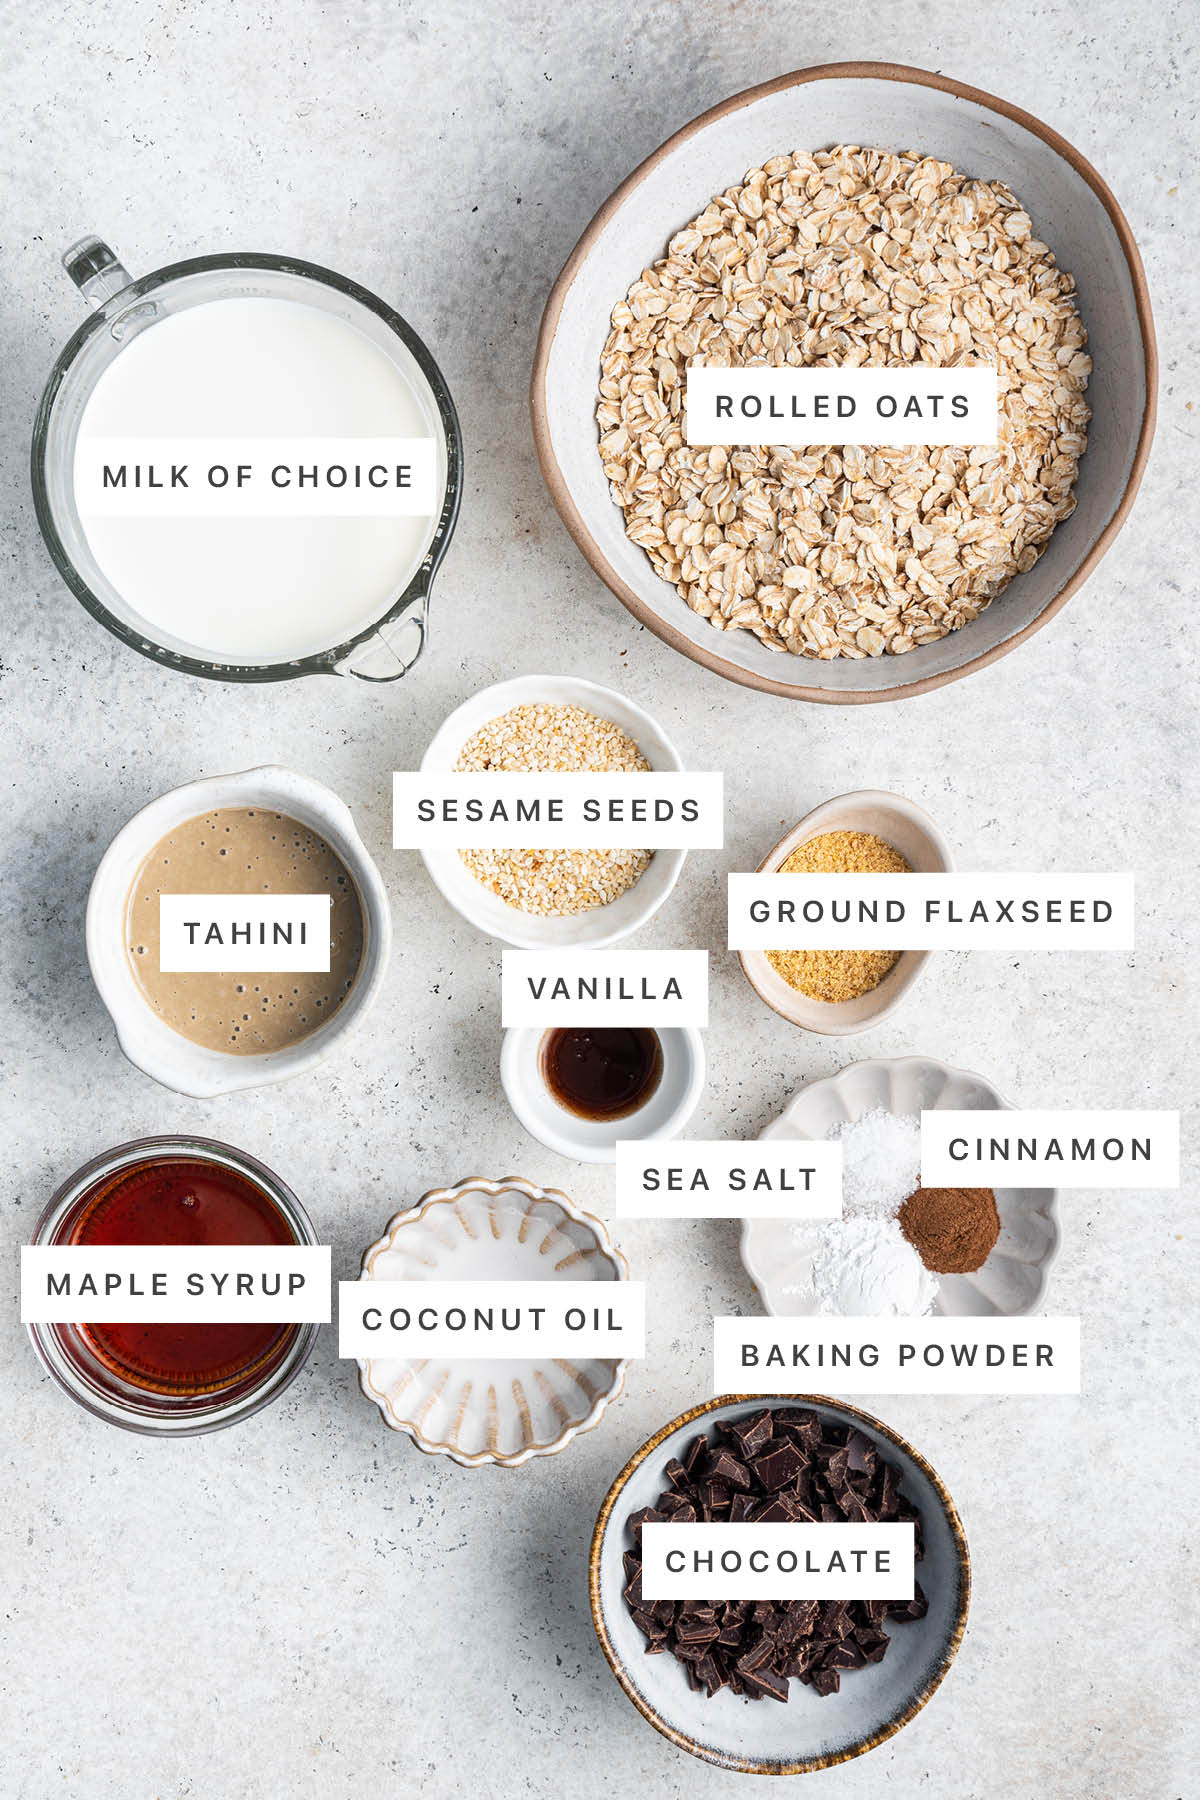 Ingredients measured out to make Tahini Baked Oatmeal: milk, rolled oats, tahini, sesame seeds, flaxseed, vanilla, maple syrup, coconut oil, sea salt, cinnamon, baking powder and chocolate.